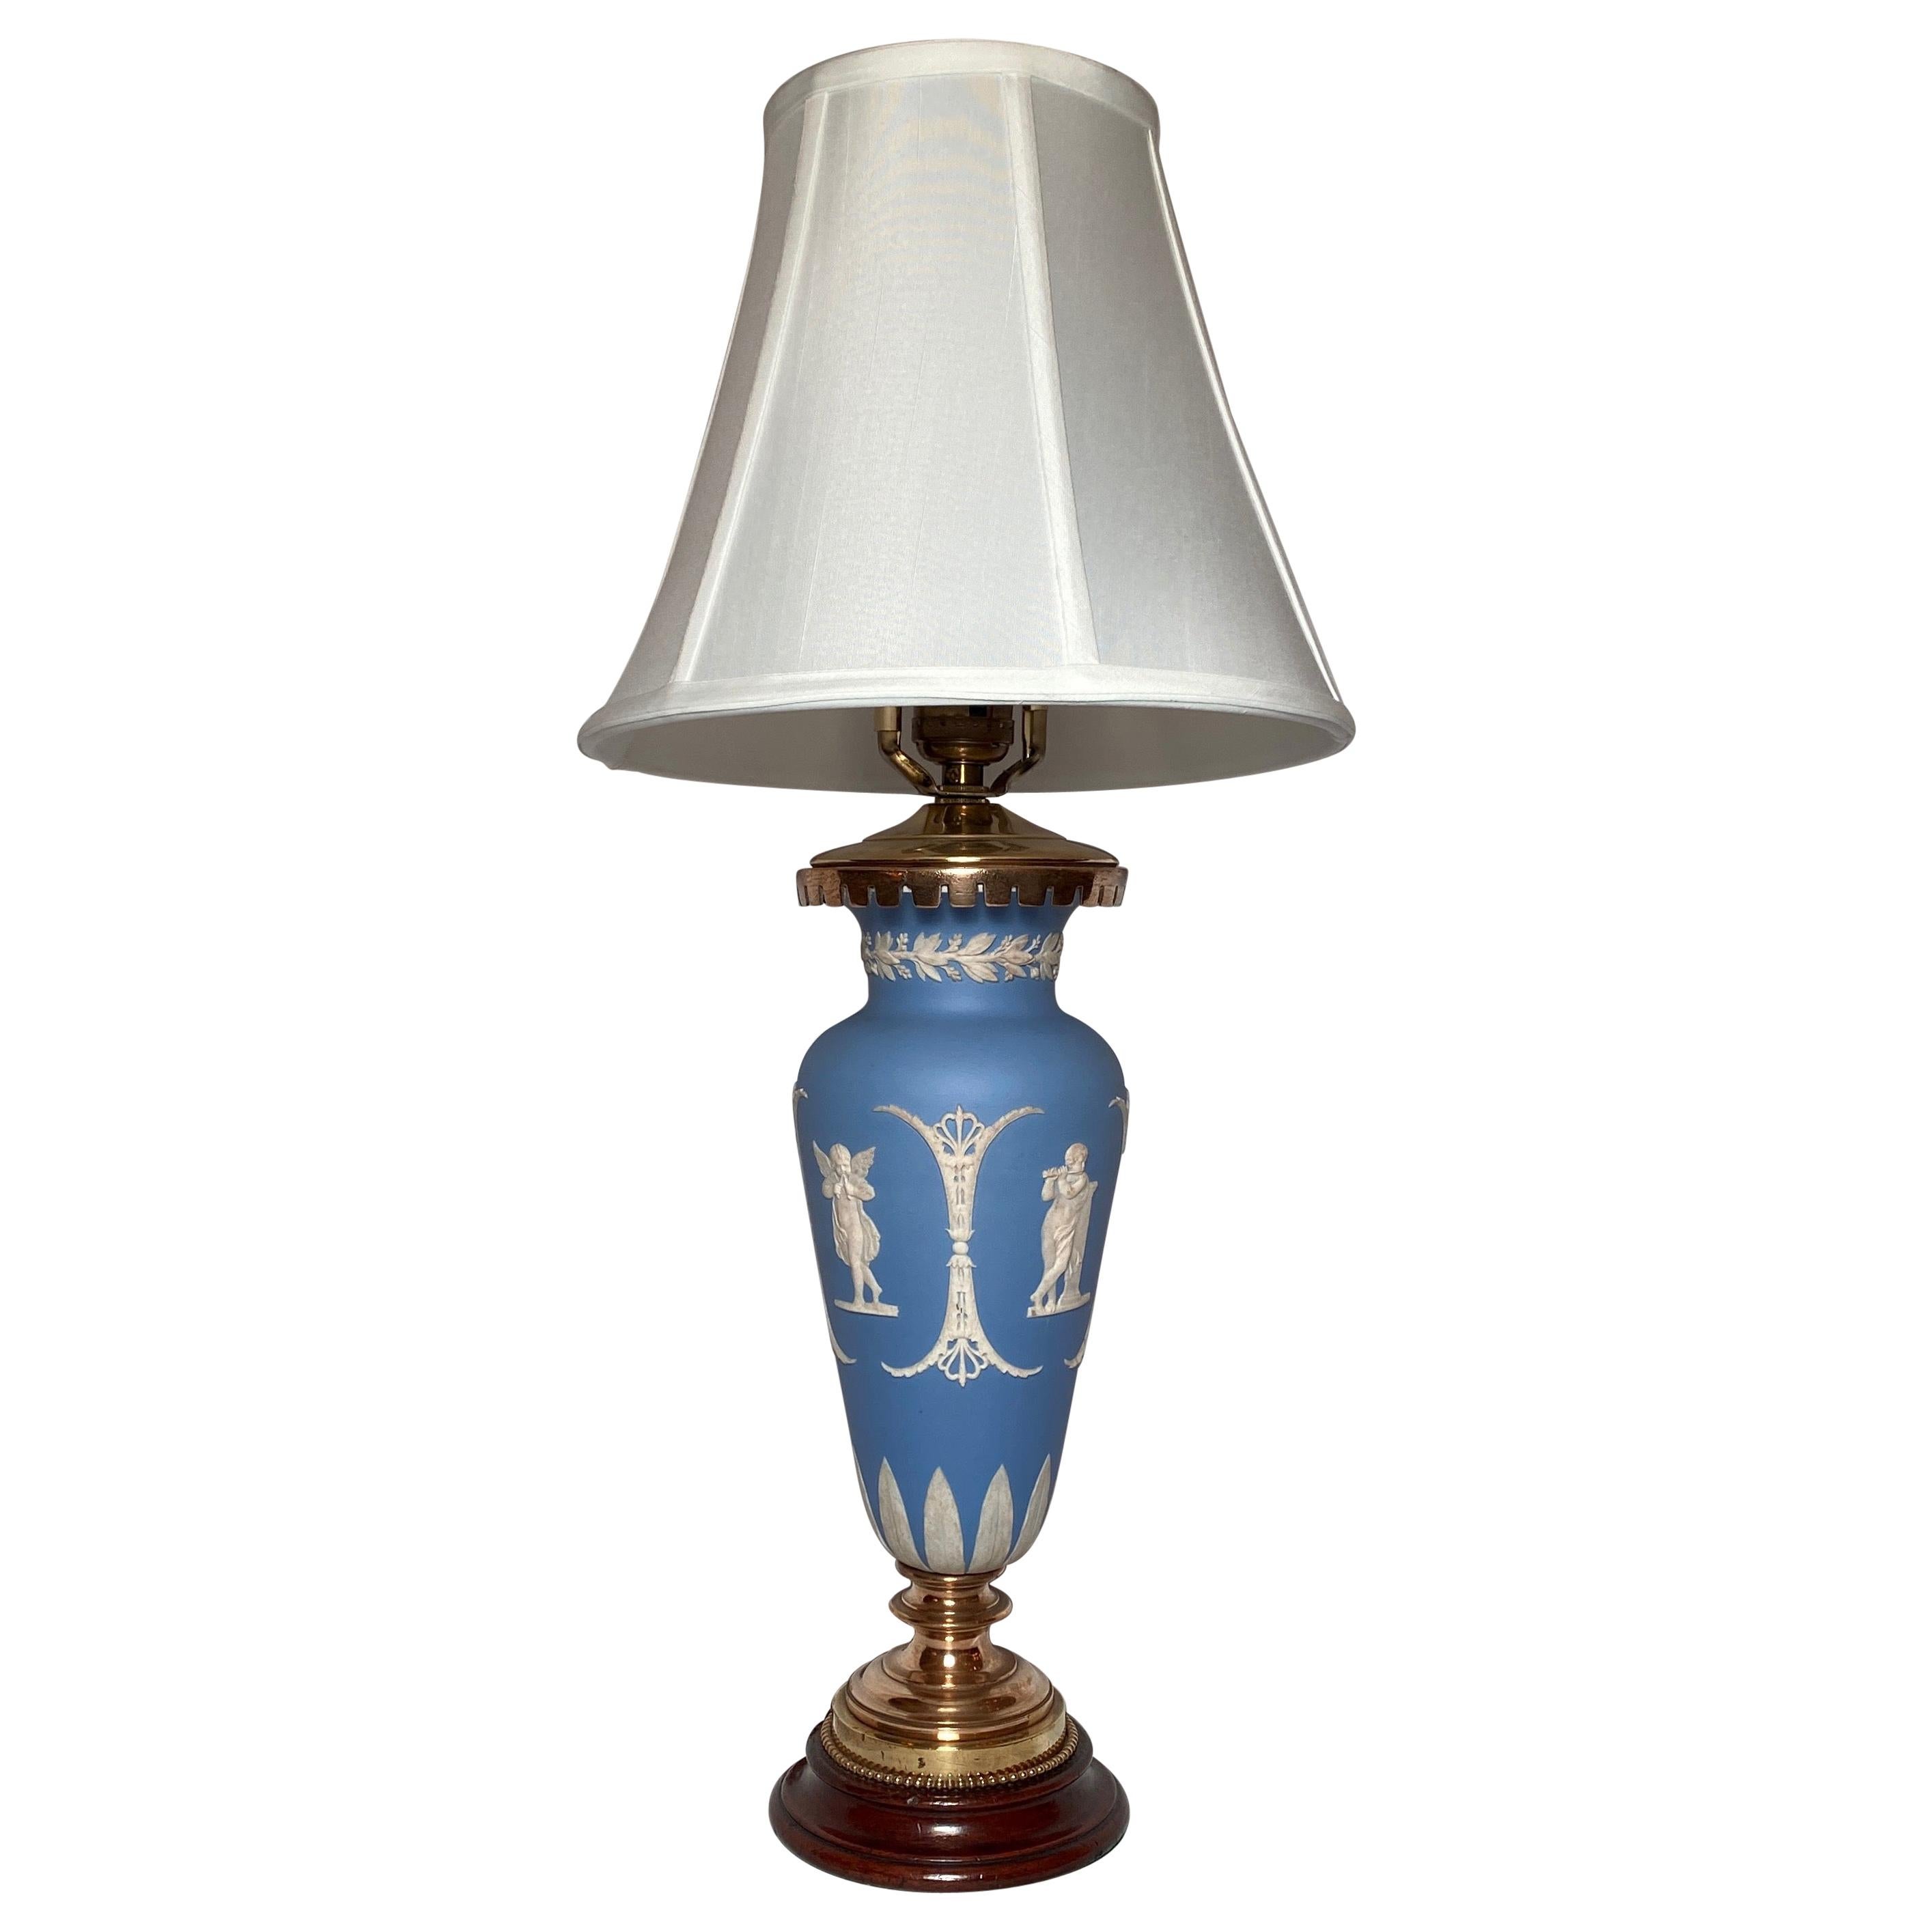 Lampe anglaise ancienne en porcelaine Wedgwood, vers 1890